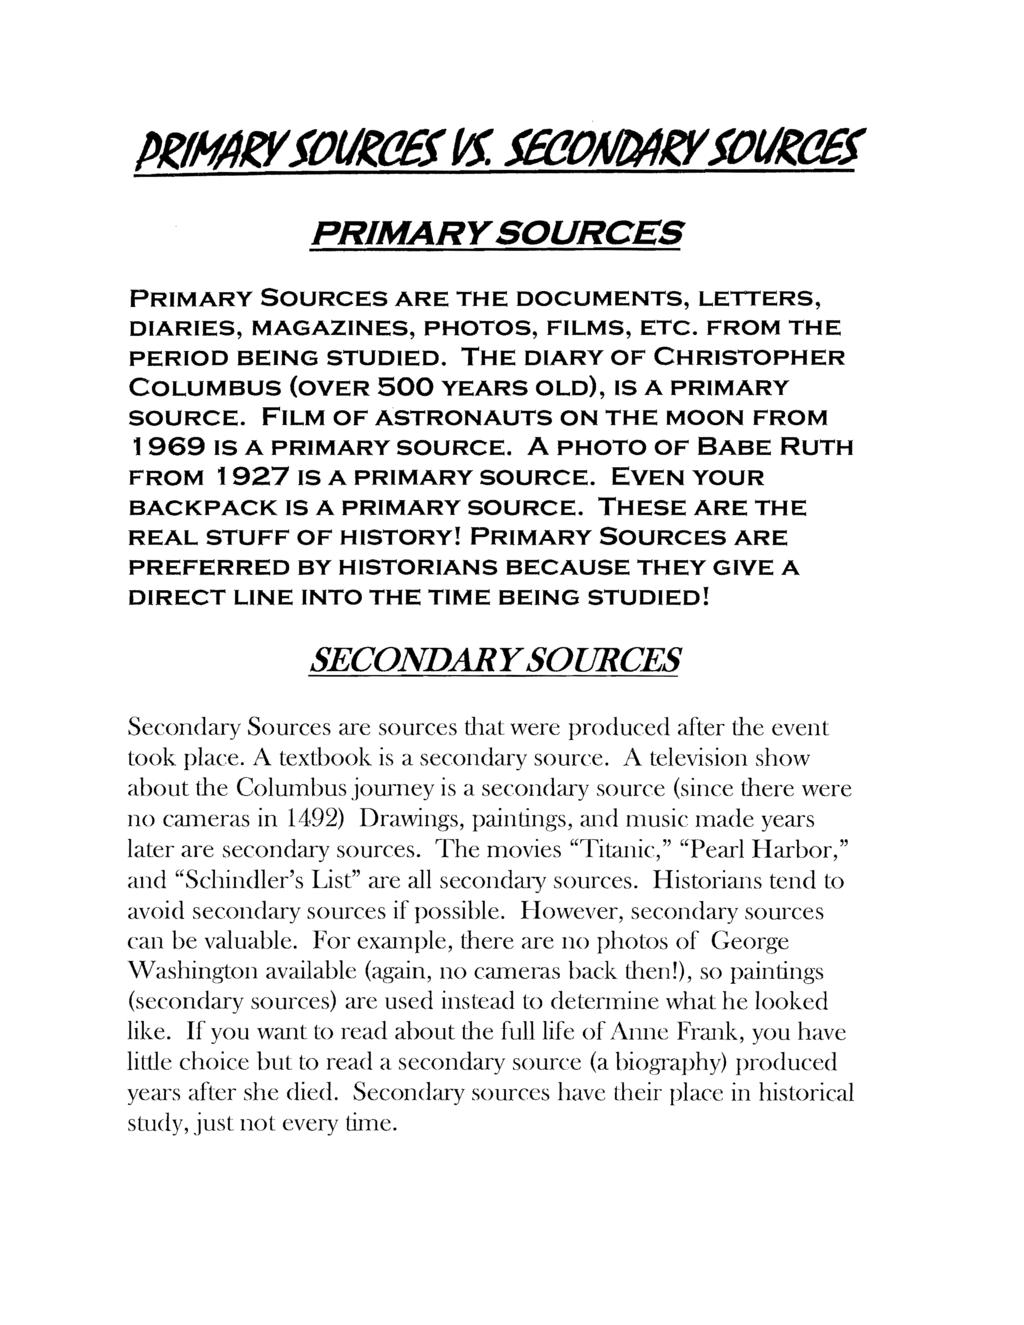 PRIMARYSOURCES PRIMARY SOURCES ARE THE DOCUMENTS, LETTERS, DIARIES, MAGAZINES, PHOTOS, FILMS, ETC. FROM THE PERIOD BEING STUDIED.